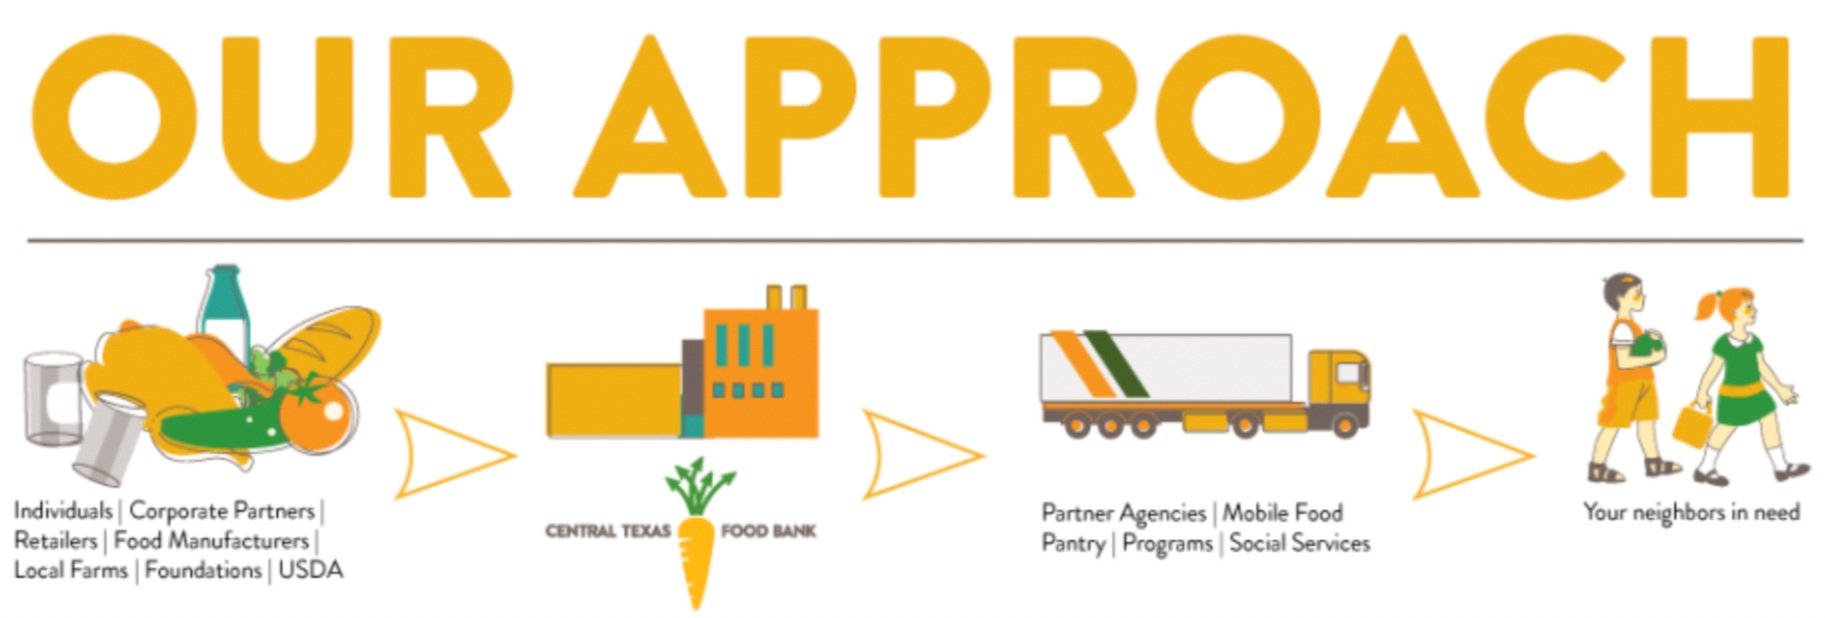 Central Texas Food Bank Approach infographic